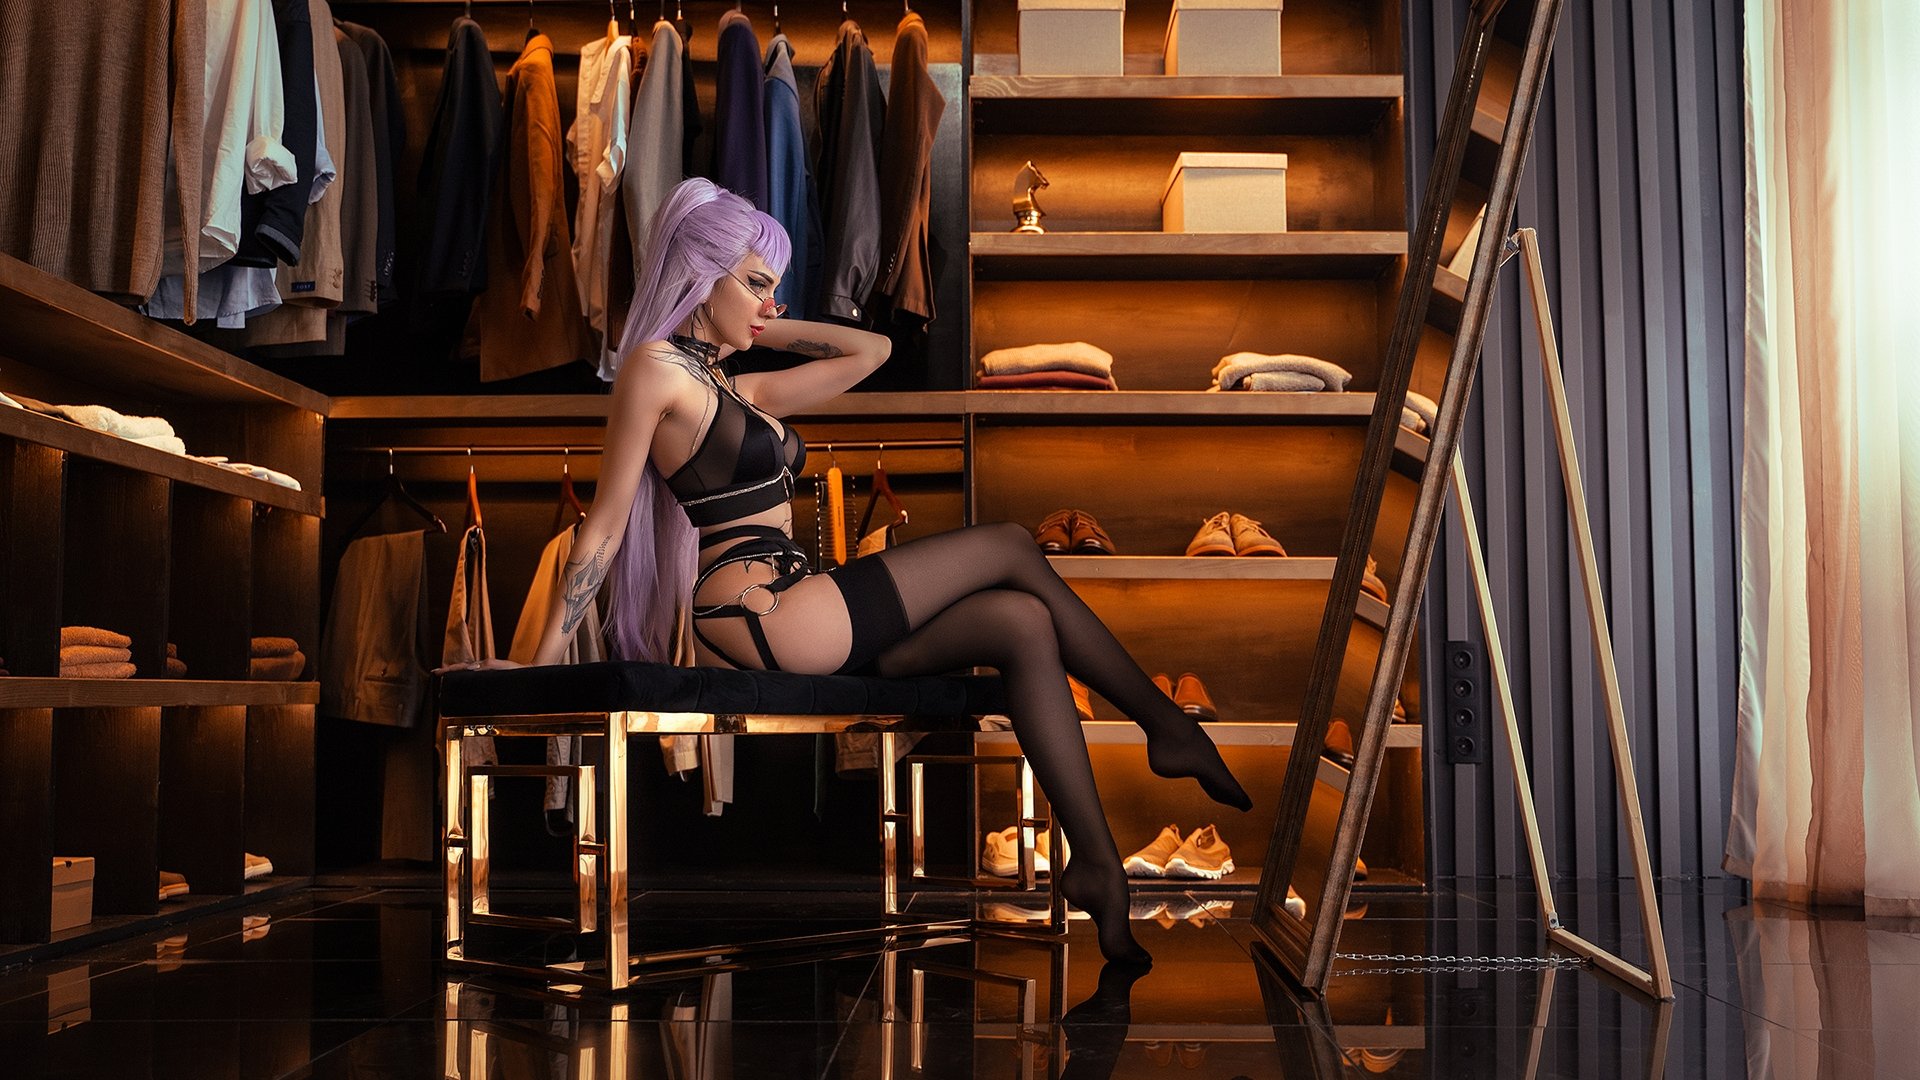 People 1920x1080 Akunohako League of Legends Evelynn (League of Legends) women model closet tattoo women with glasses lingerie black lingerie black stockings mirror sitting cosplay Alin Ma pointed toes